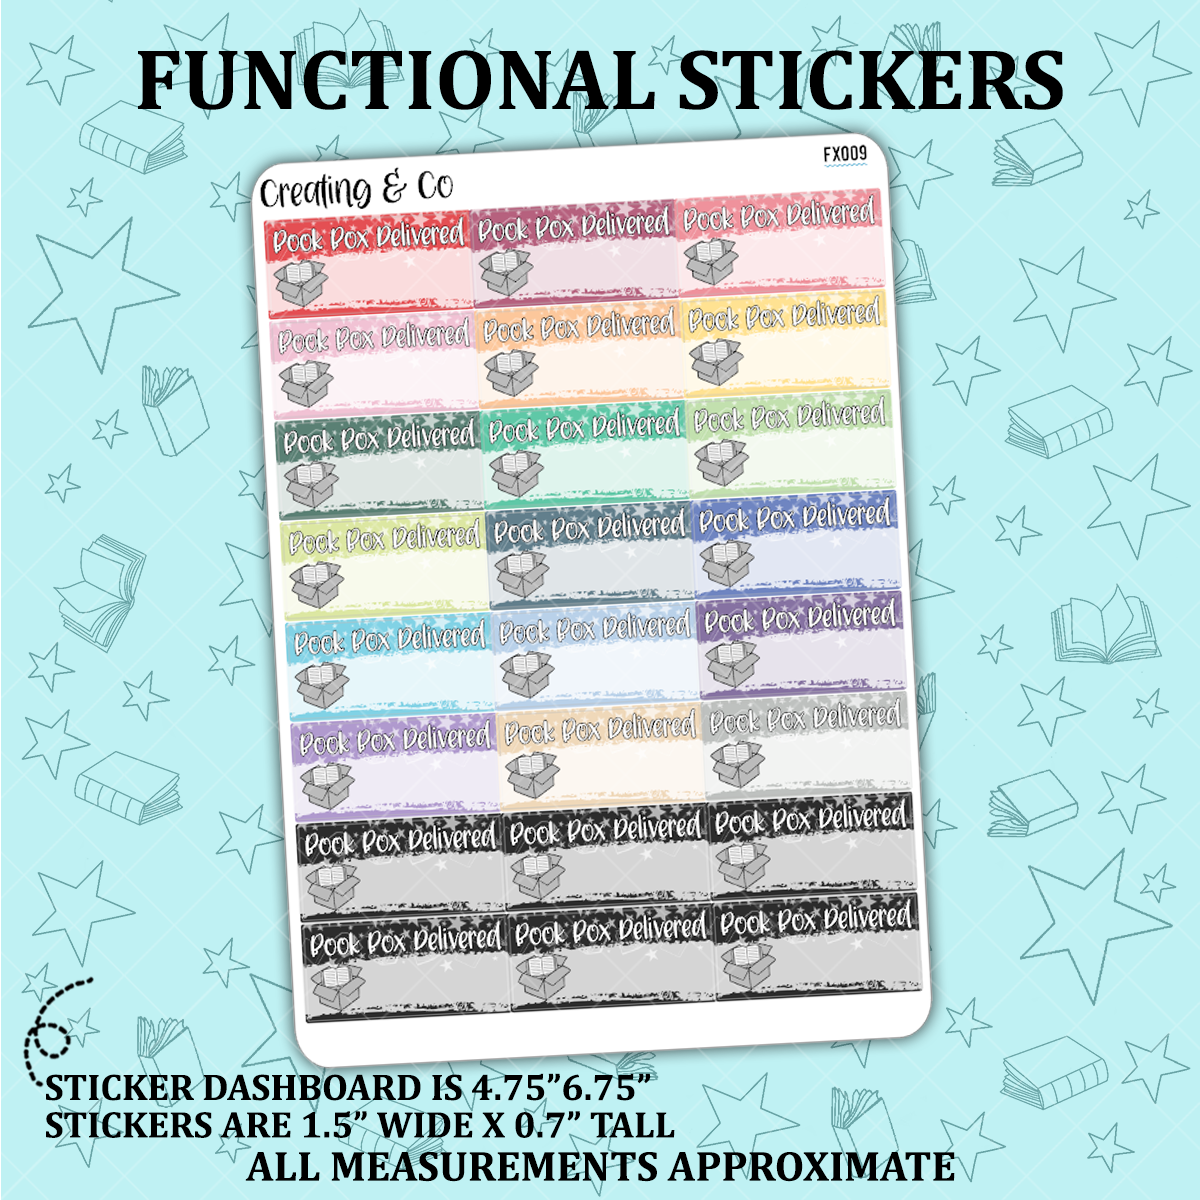 Book Box Delivered Reading Functional Sticker Sheet - FX009